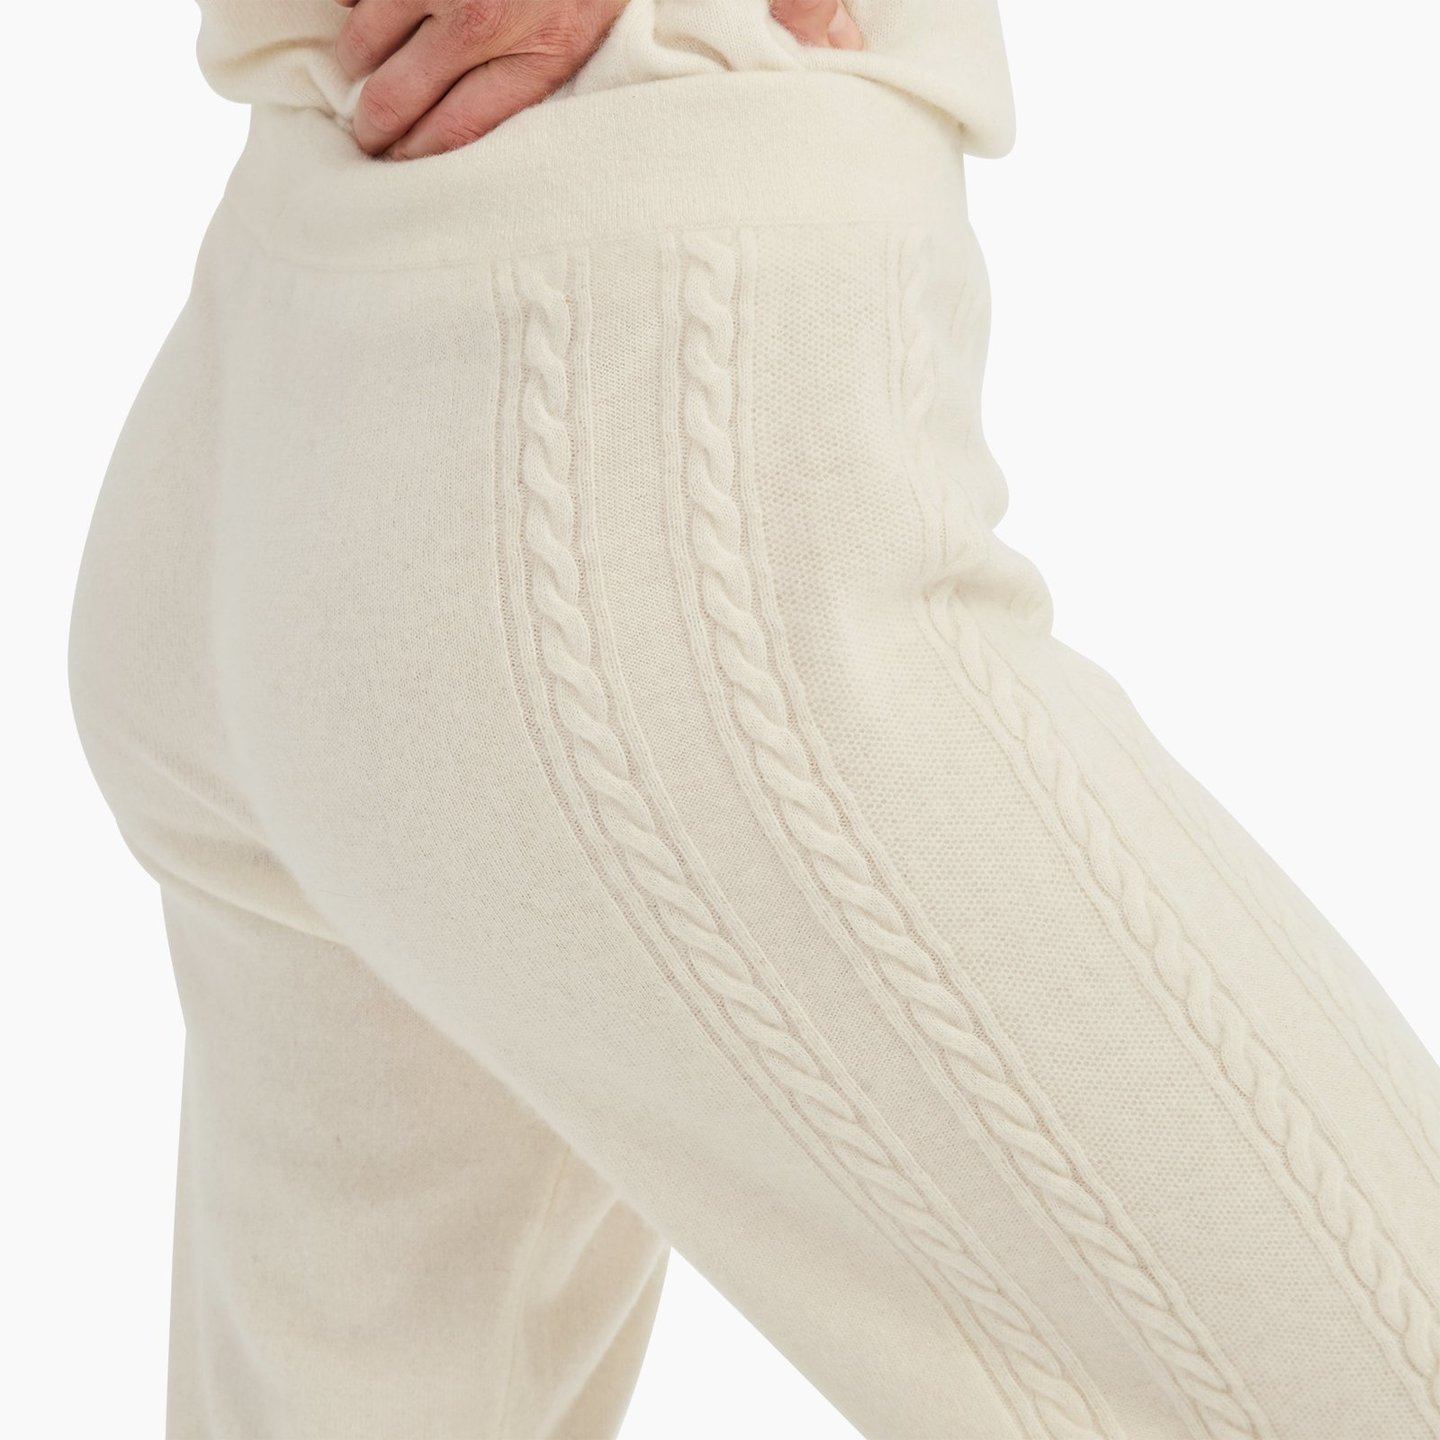 NWEB000842_Cashmere_Cable_Jogger_White_016_1440x.jpg